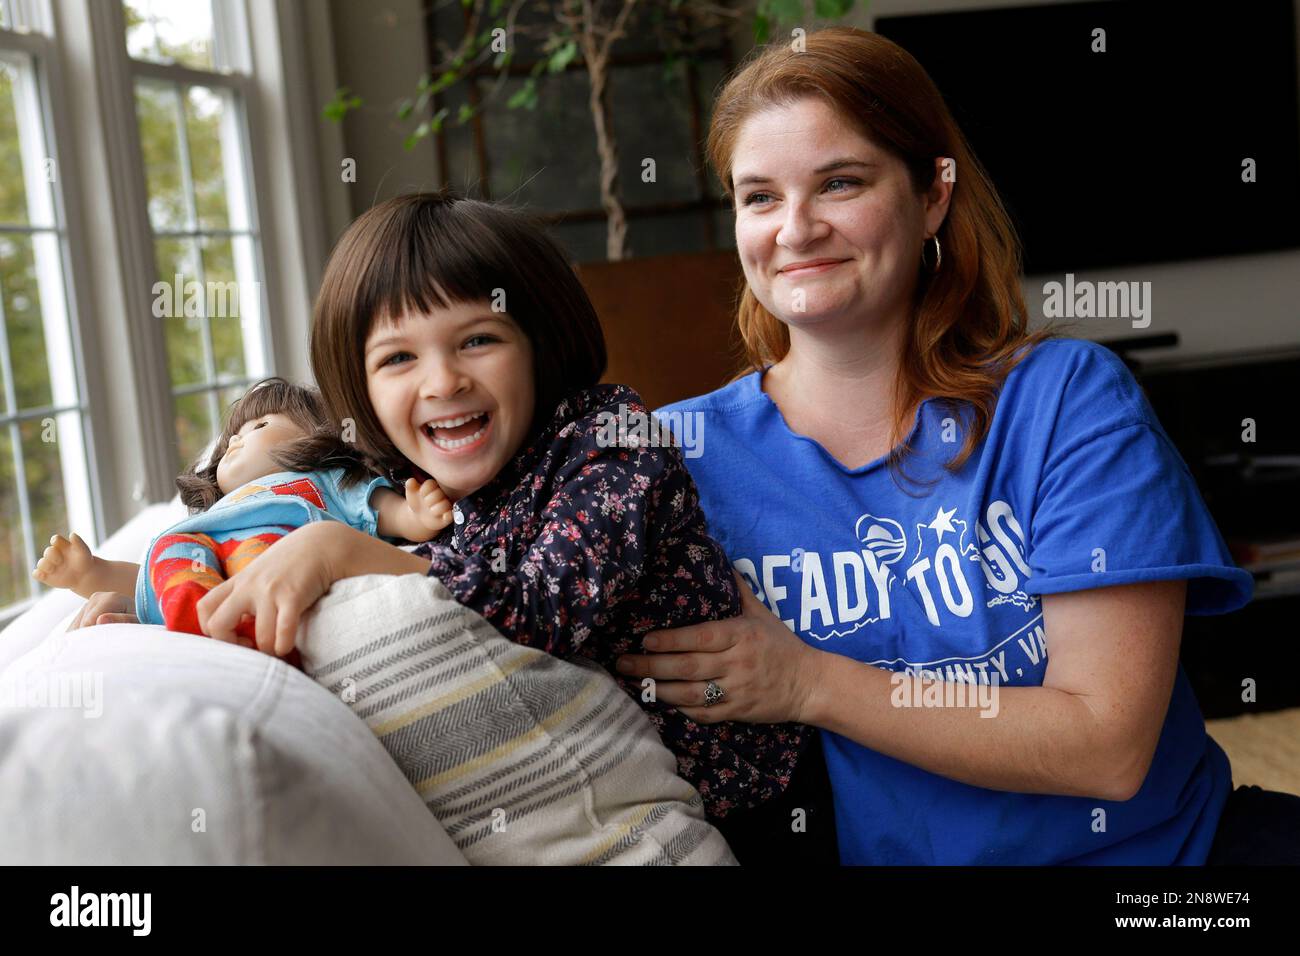 In this Monday, Oct. 8, 2012 photo, Molly Lovato, a volunteer with the Obama campaign, poses for a photograph with her daughter Nola Trindade, 4, at their home in Leesburg, Va. Lovato credits the president with steering the country away from financial disaster. "I think he kept us from sliding into a depression," she says. "I'm really dumbfounded by people who say 'Why didn't he fix this?' and it's 20 minutes later." She compares reviving the economy to gutting and then rehabbing a home. "It takes a hot minute for everything to unravel," she says, "but to put it back together is really very di Stock Photo